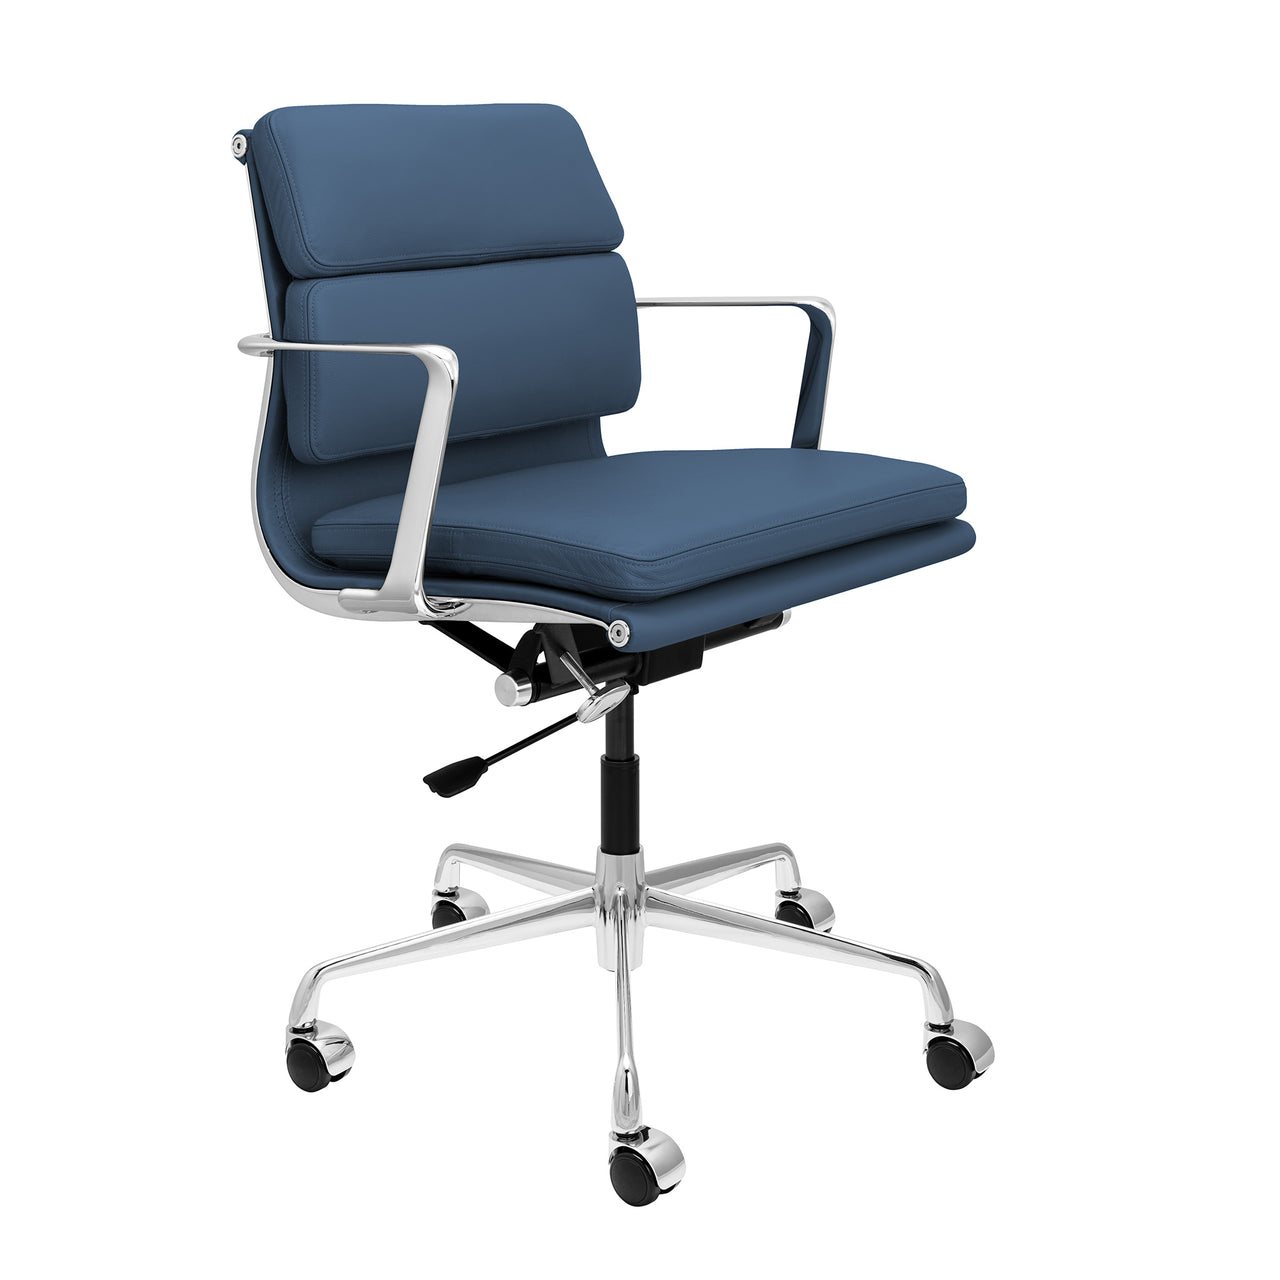 Pro Soft Pad Management Chair (Blue Italian Leather)